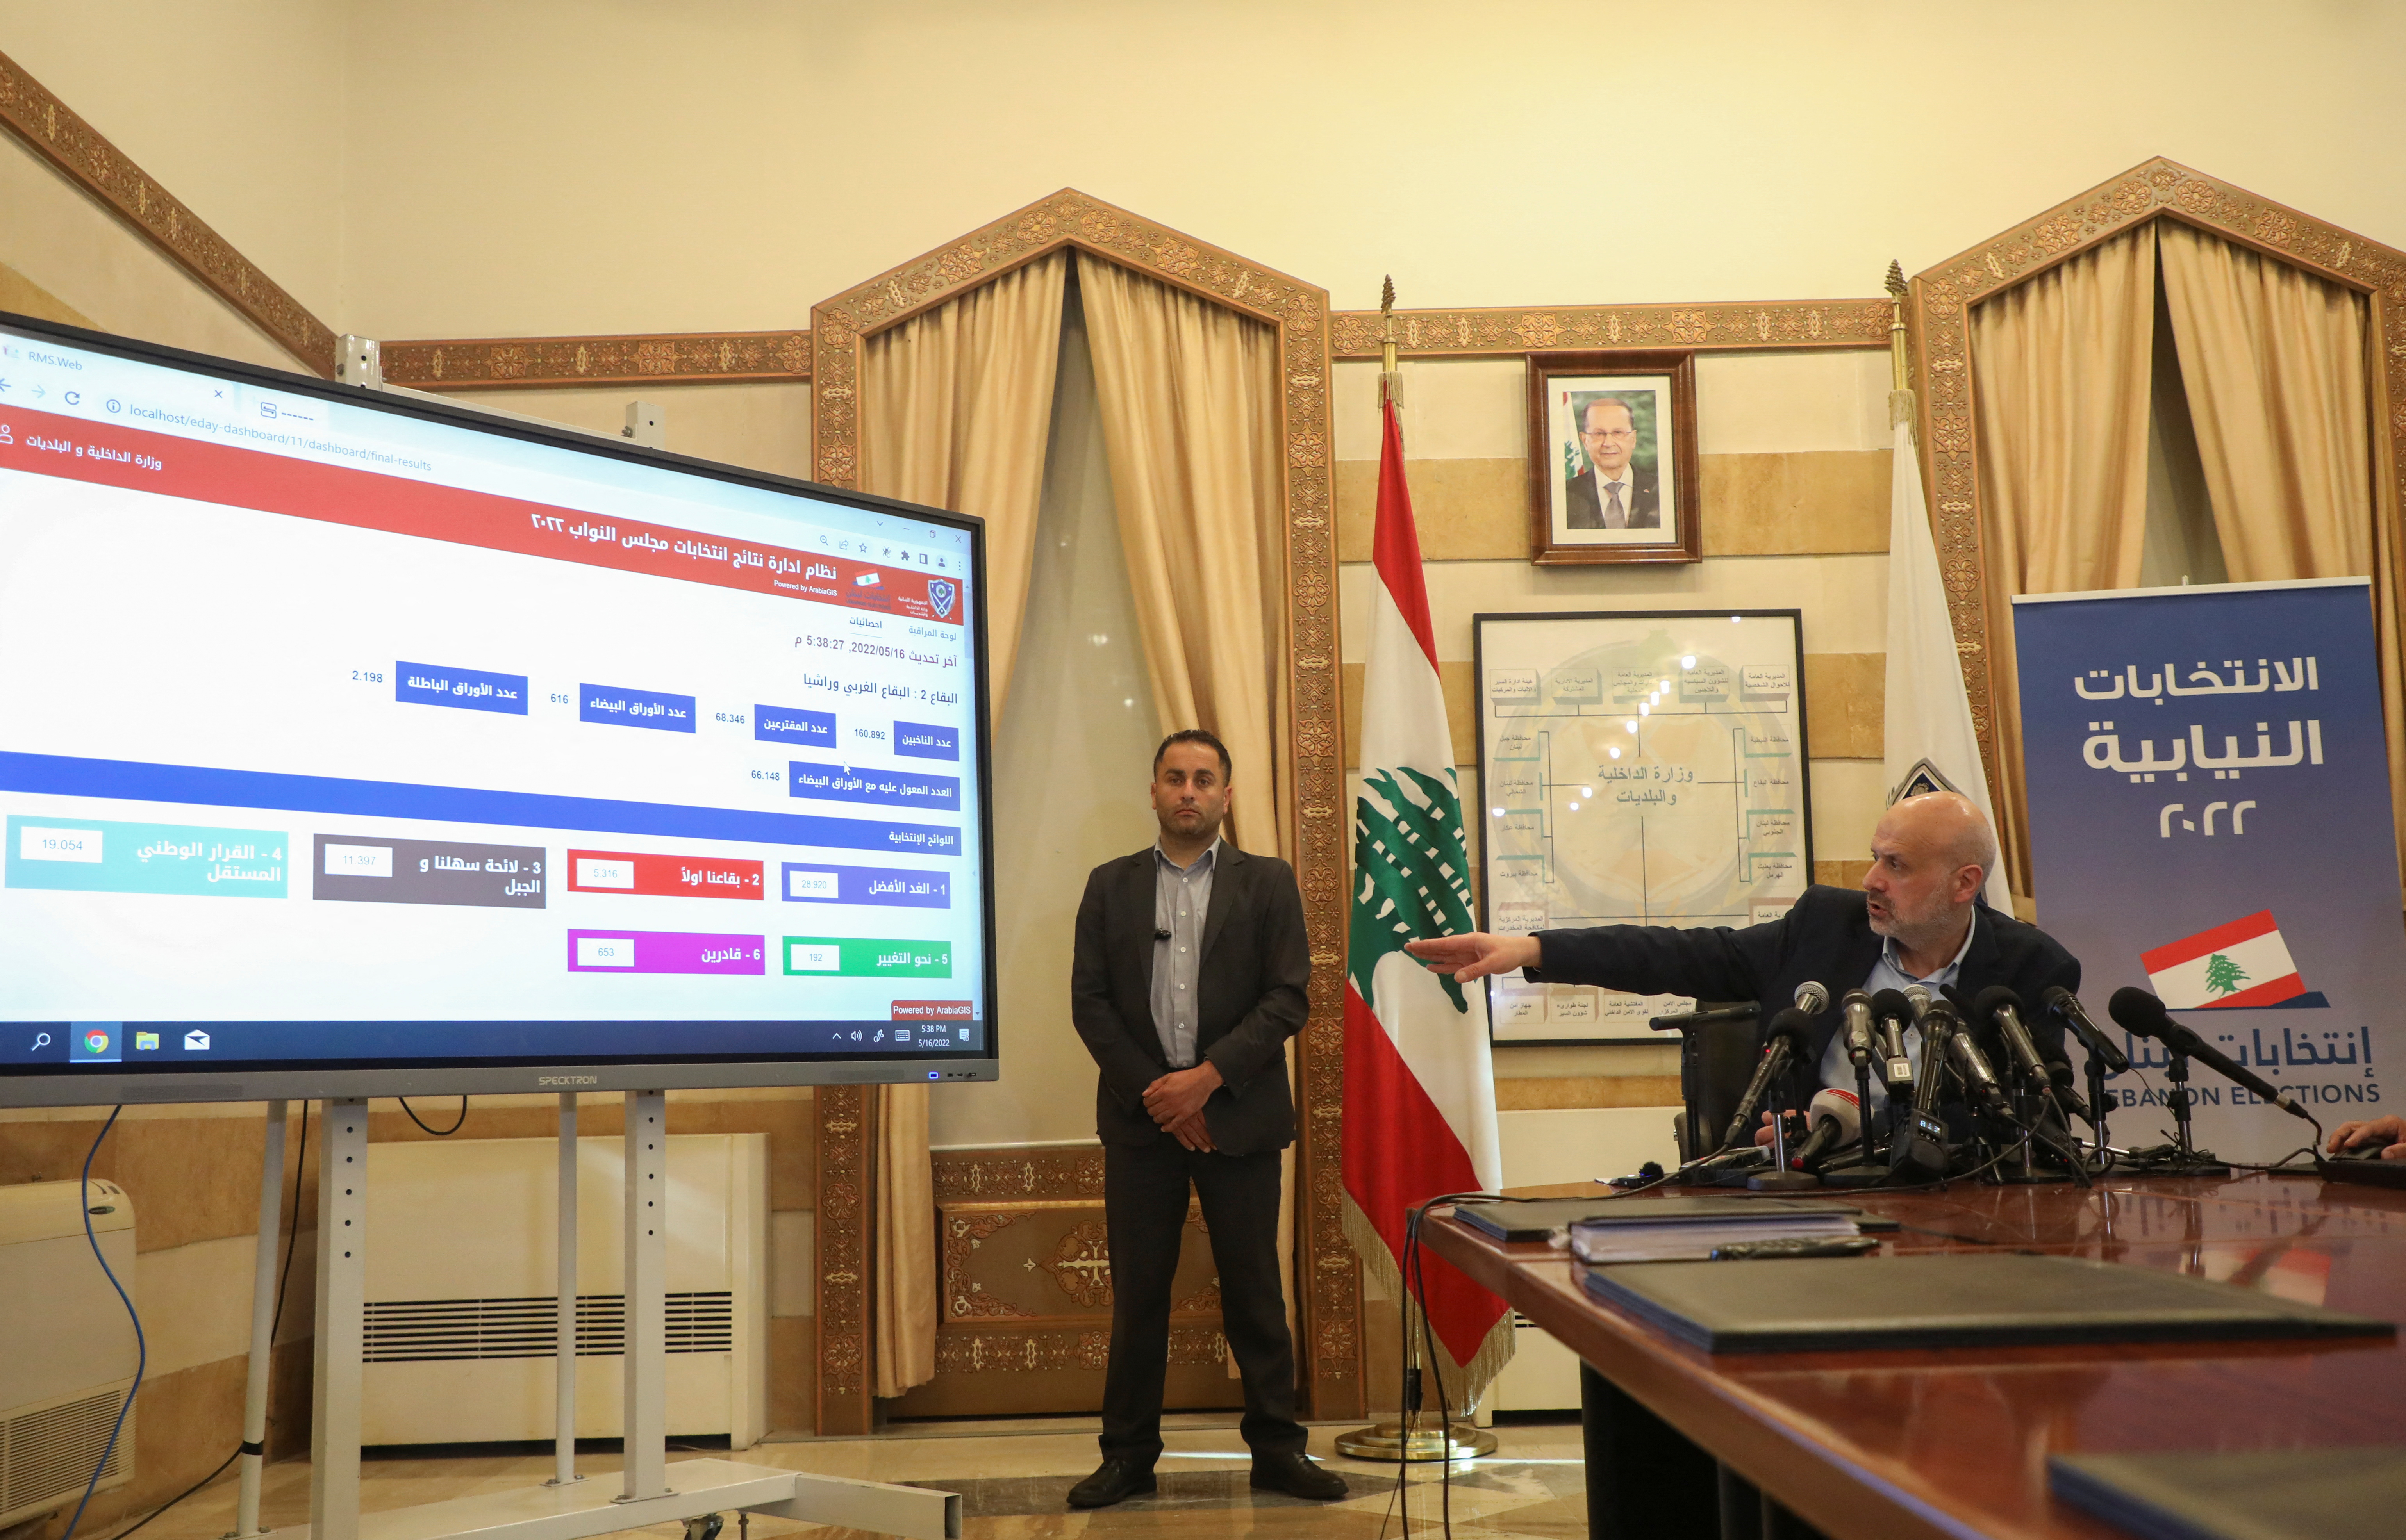 Lebanon's Interior Minister Bassam Mawlawi speaks during a press conference in Beirut